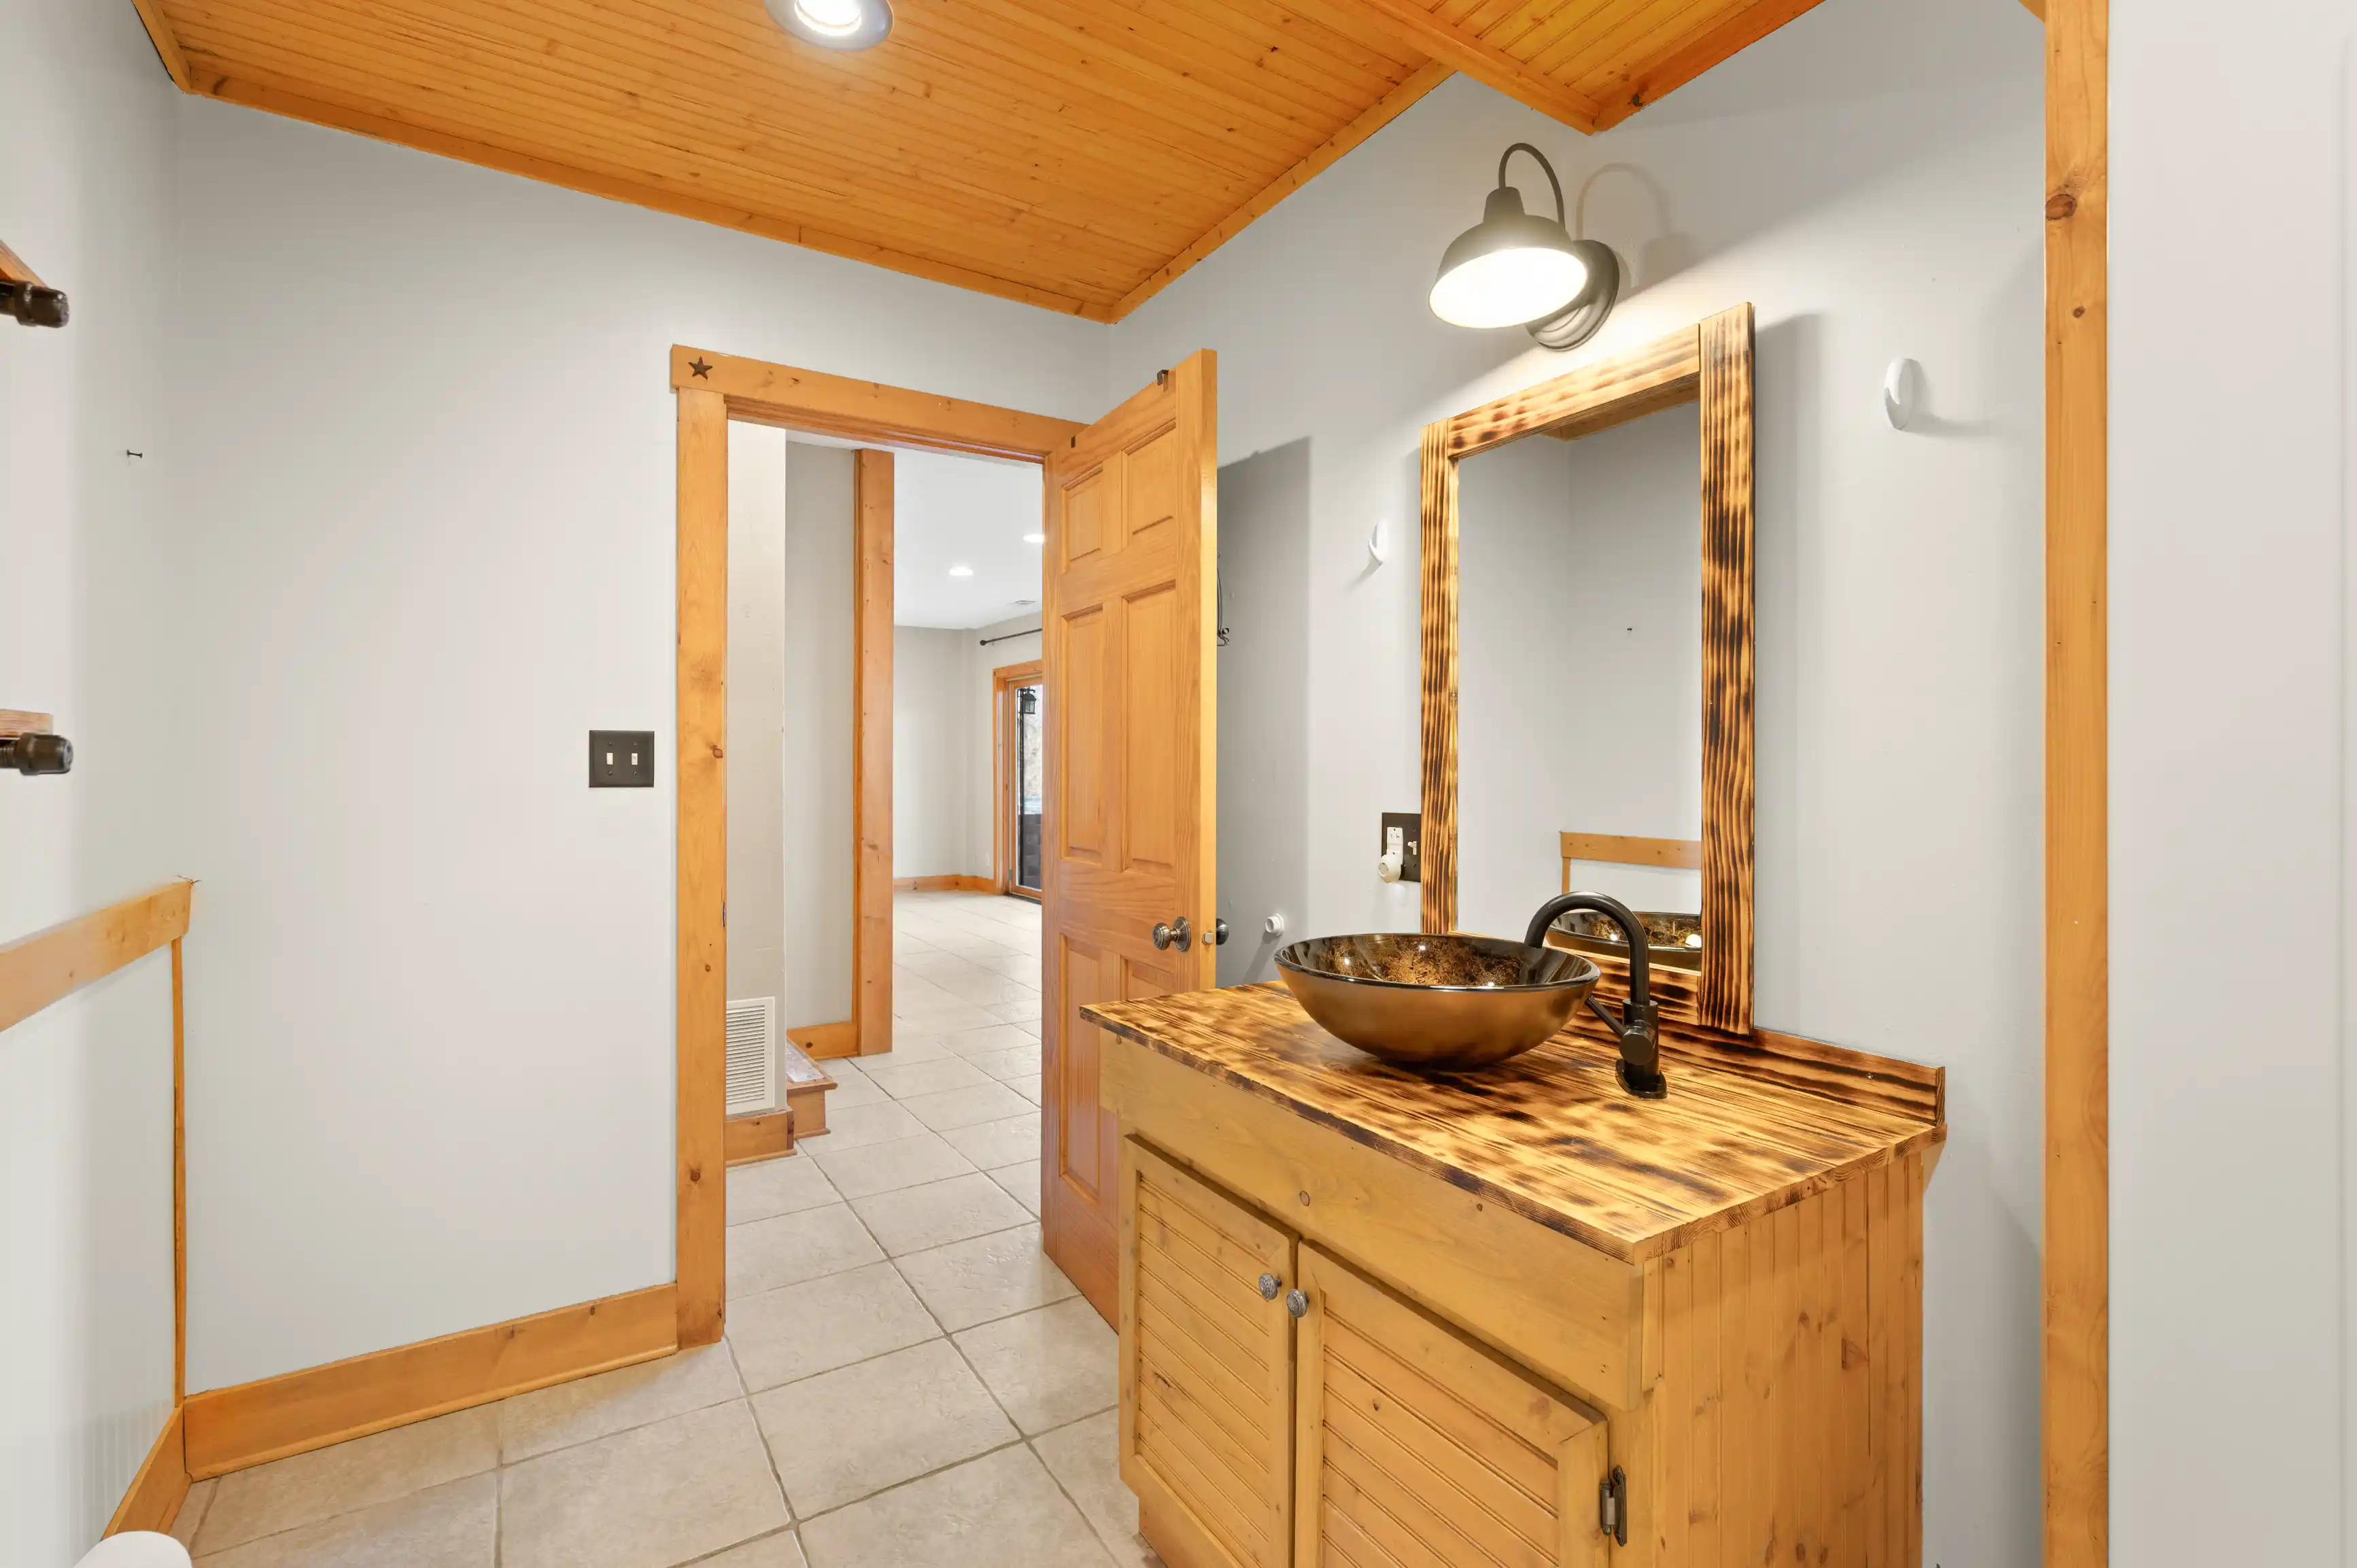 Interior view of a hallway with wooden ceiling and trim, featuring a vanity with a vessel sink and mirror, leading to another room with open doors.